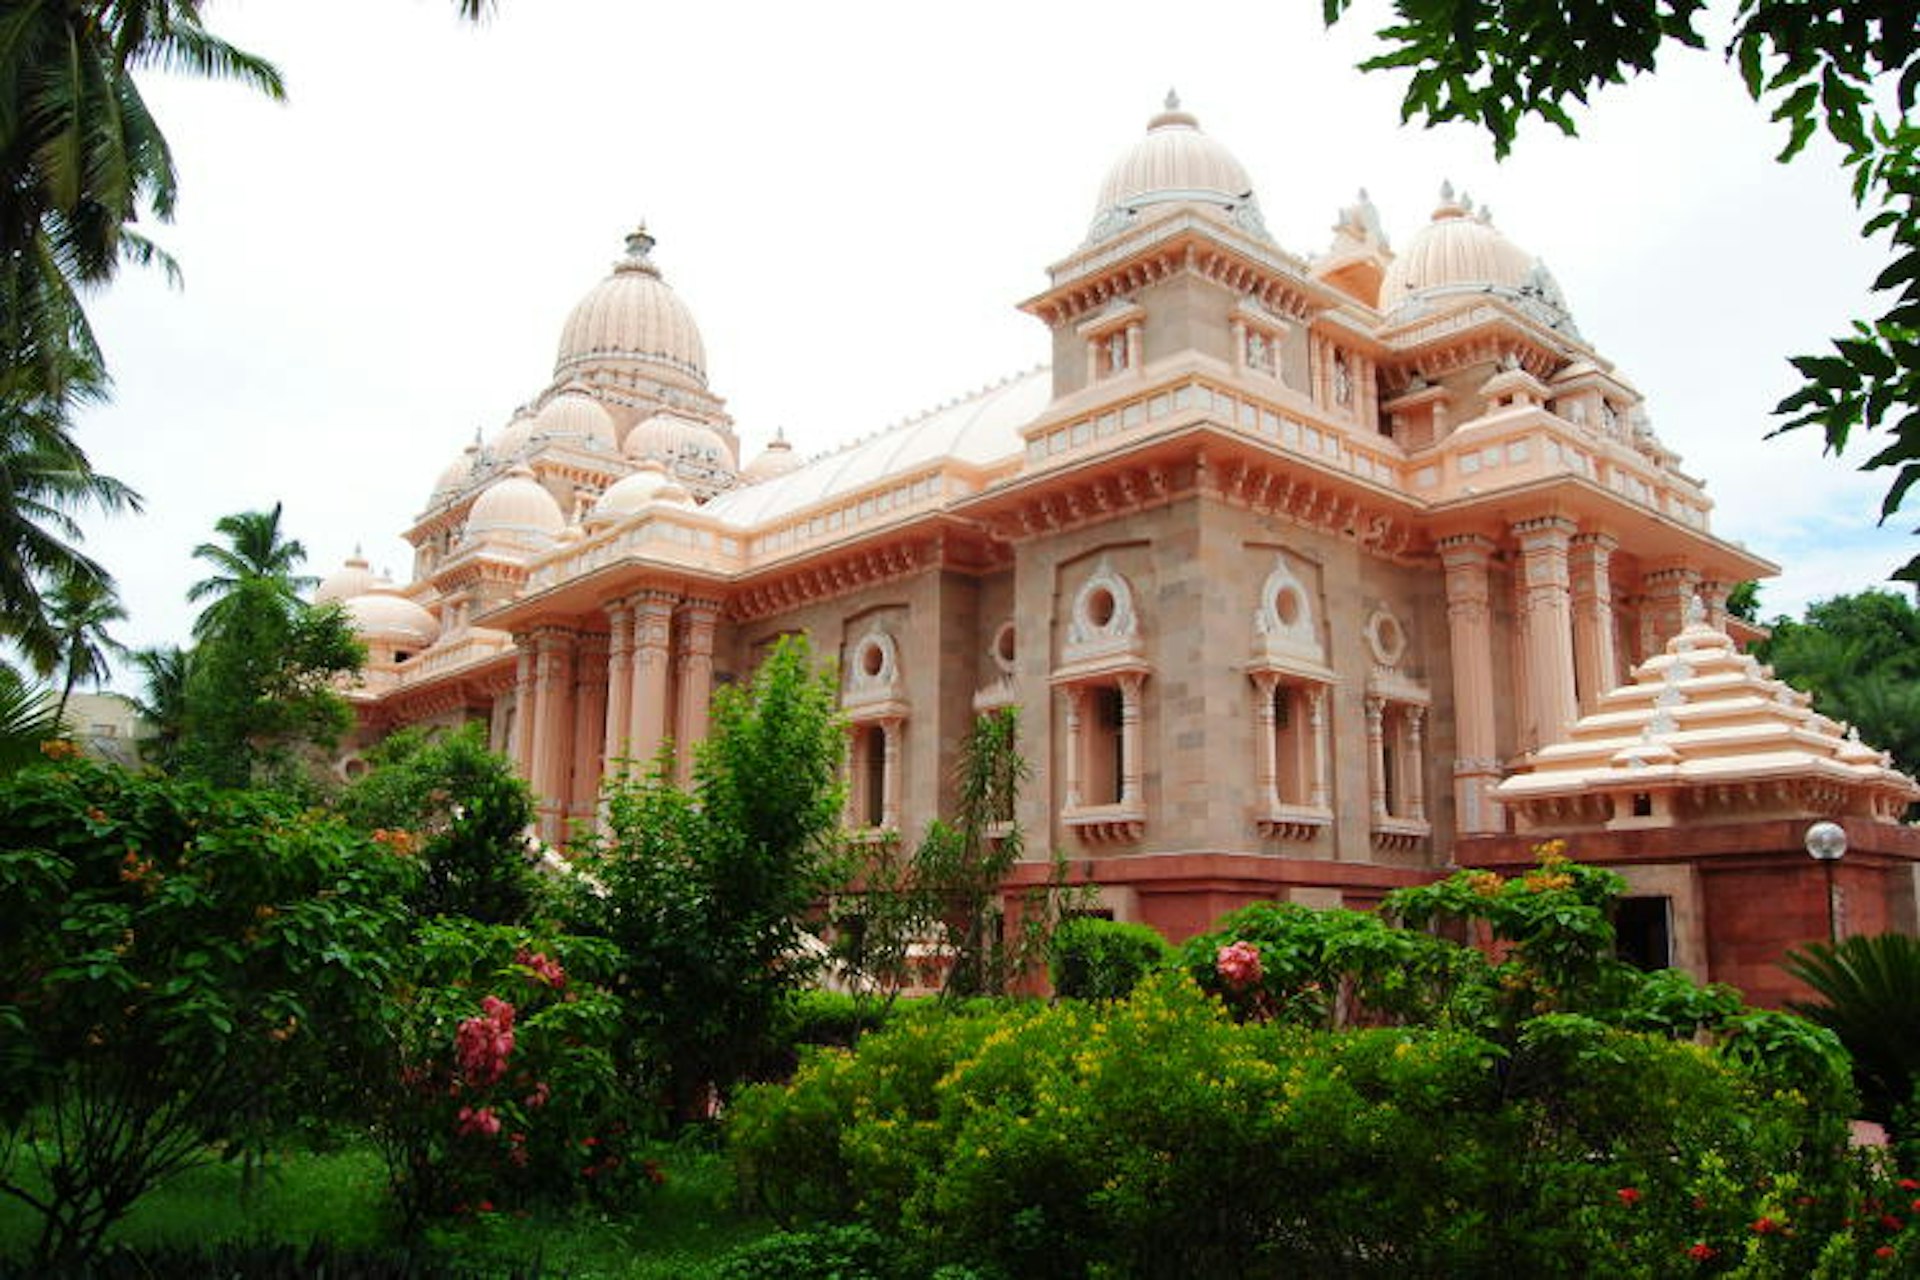 Domes of the Universal Temple at Sri Ramakrishna Math. Image by John Noble / Lonely Planet.